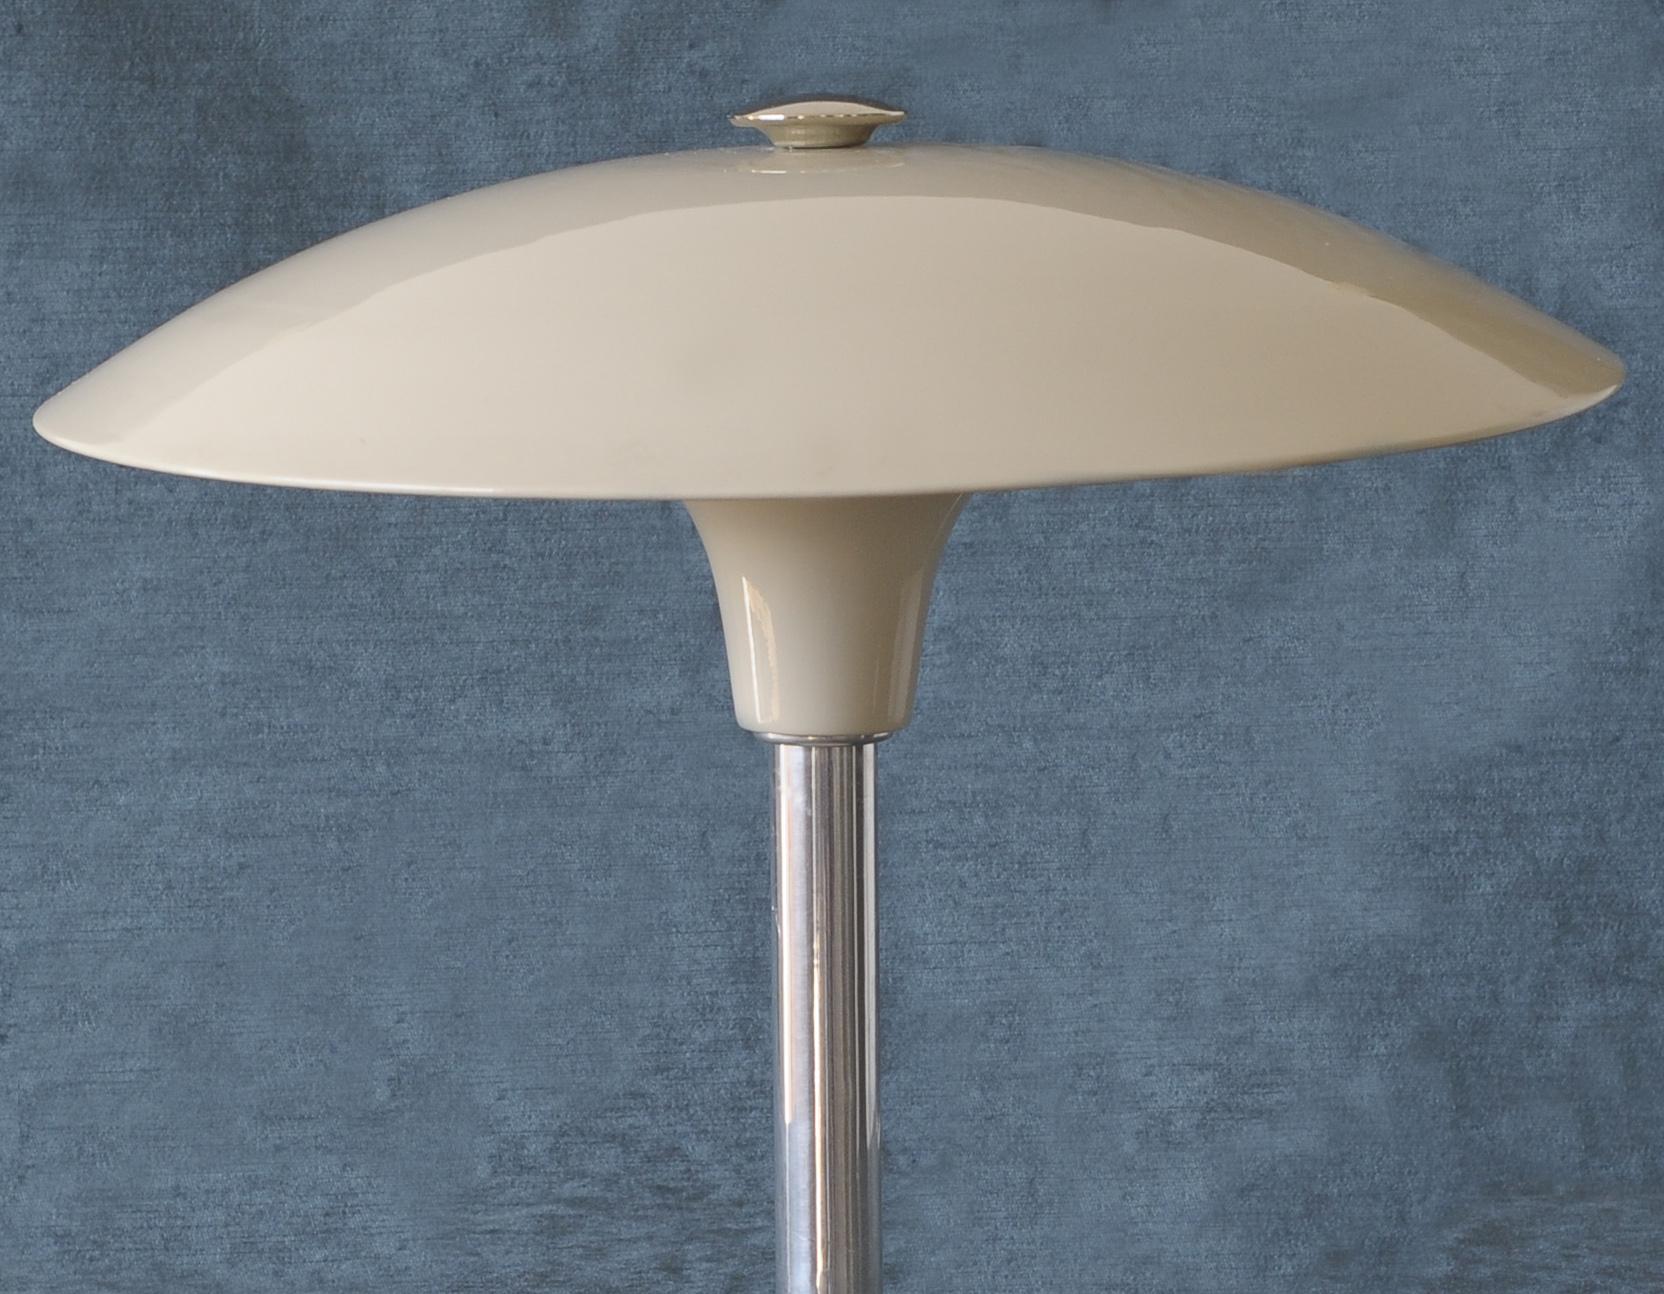 Metalwork Pair of Max Schumacher Art Deco Ivory Painted Metal Dome Table Lamps, 1930s For Sale